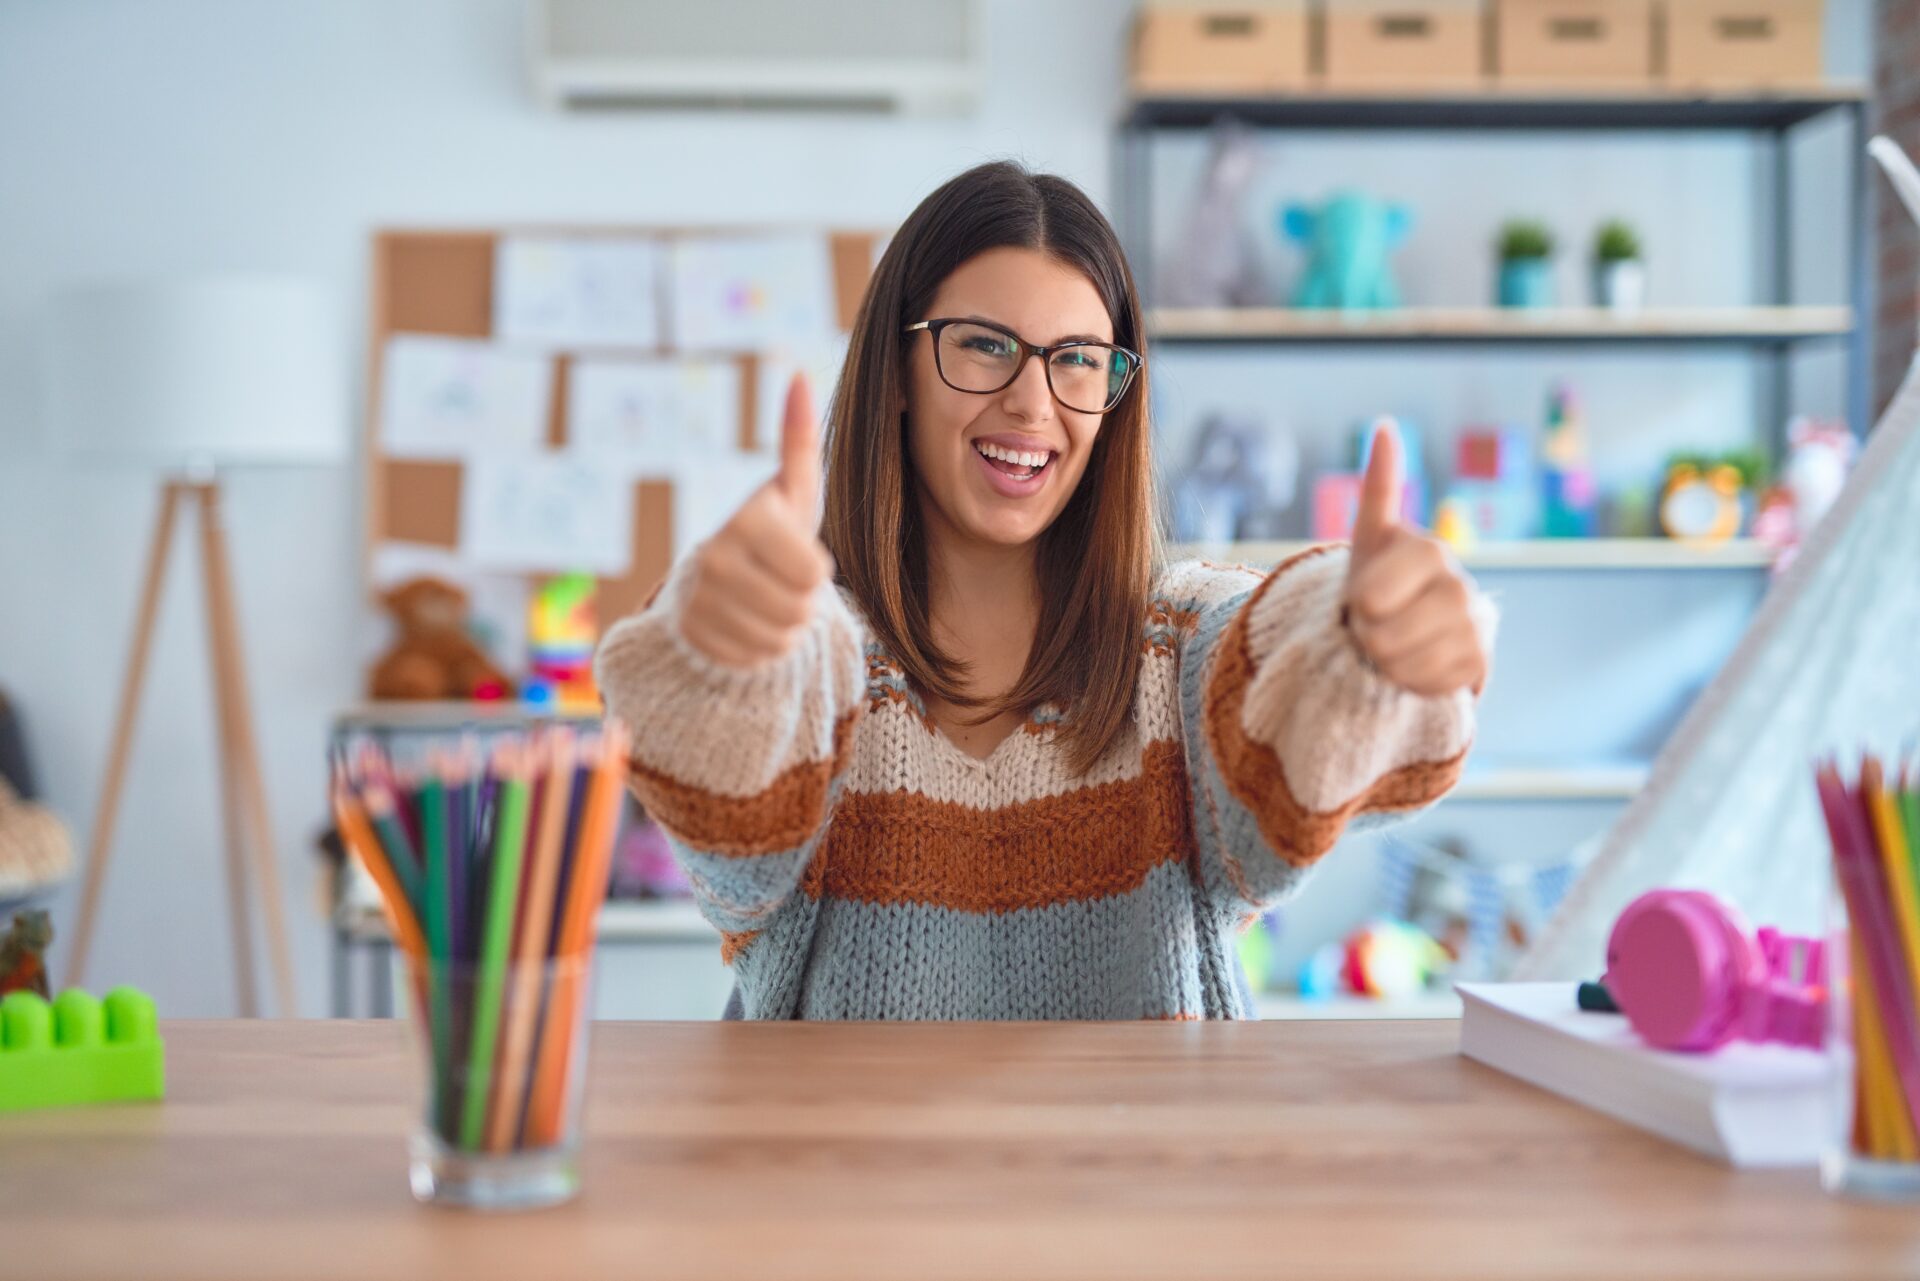 The best yea to prepare for a TEFL course: get excited